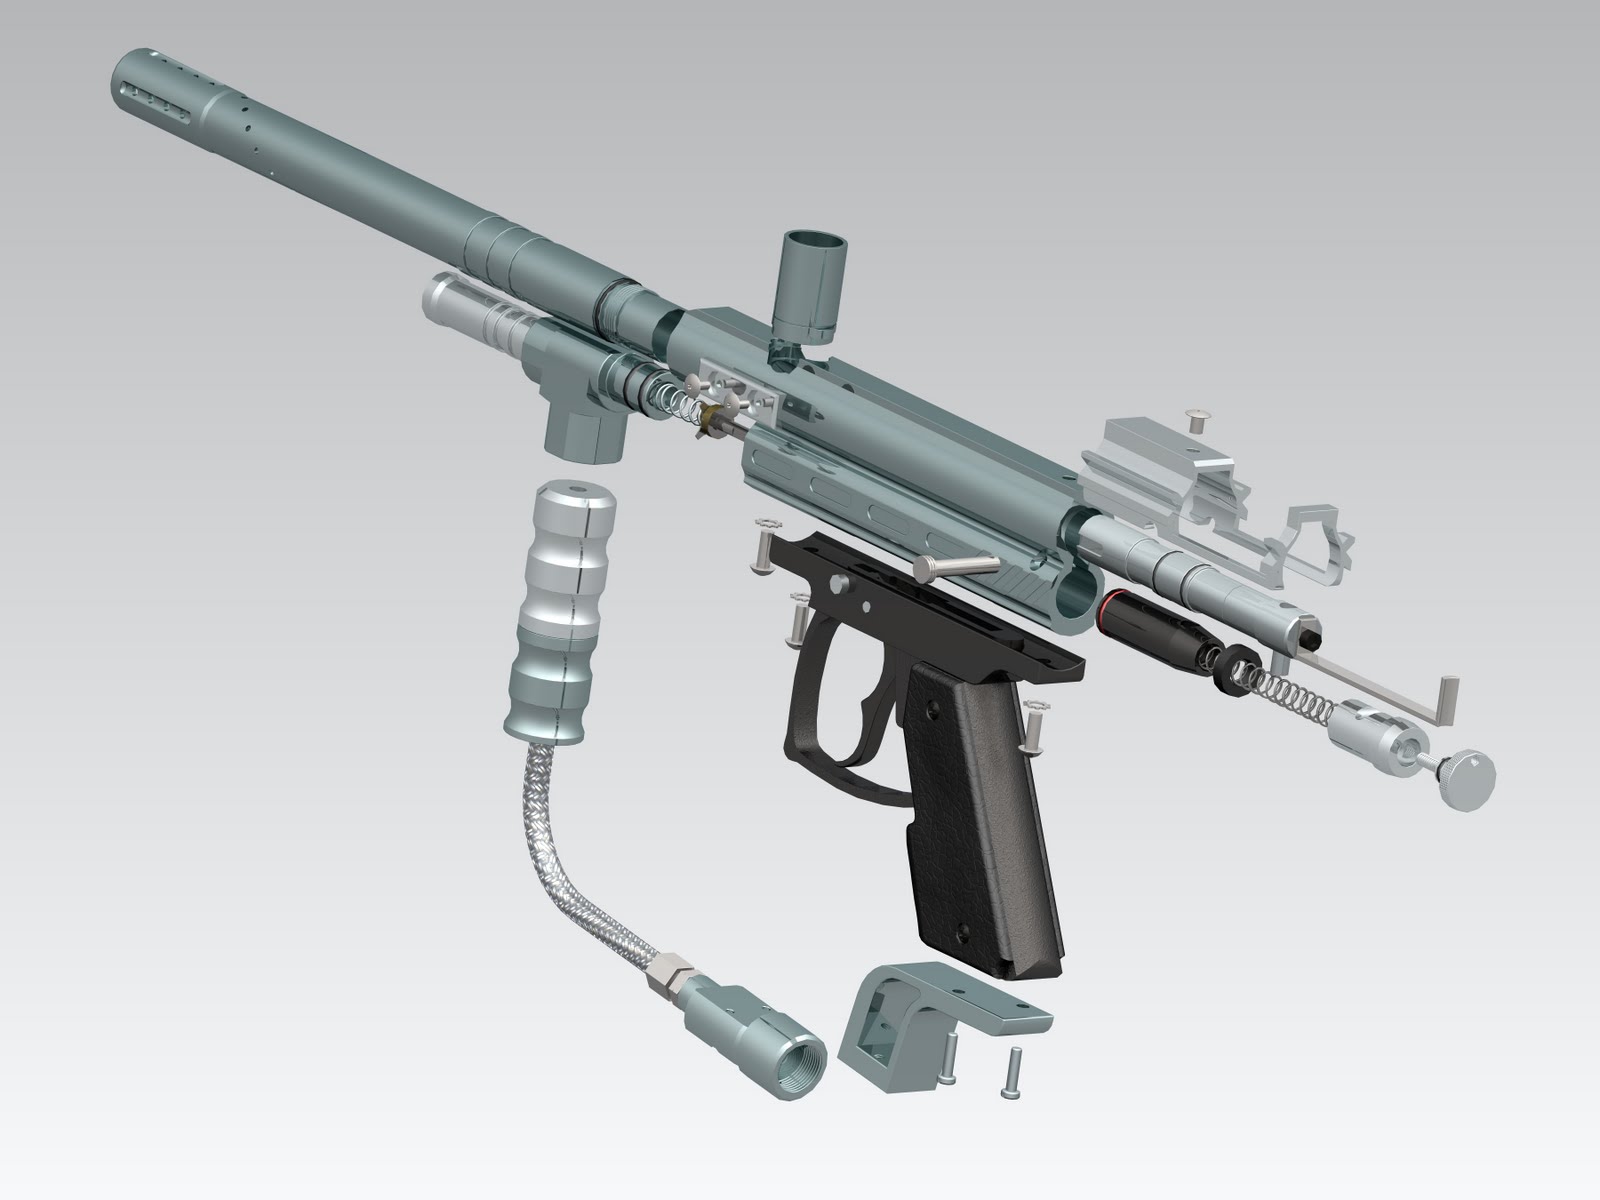 Evan's Place: CAD model of Paintball Gun